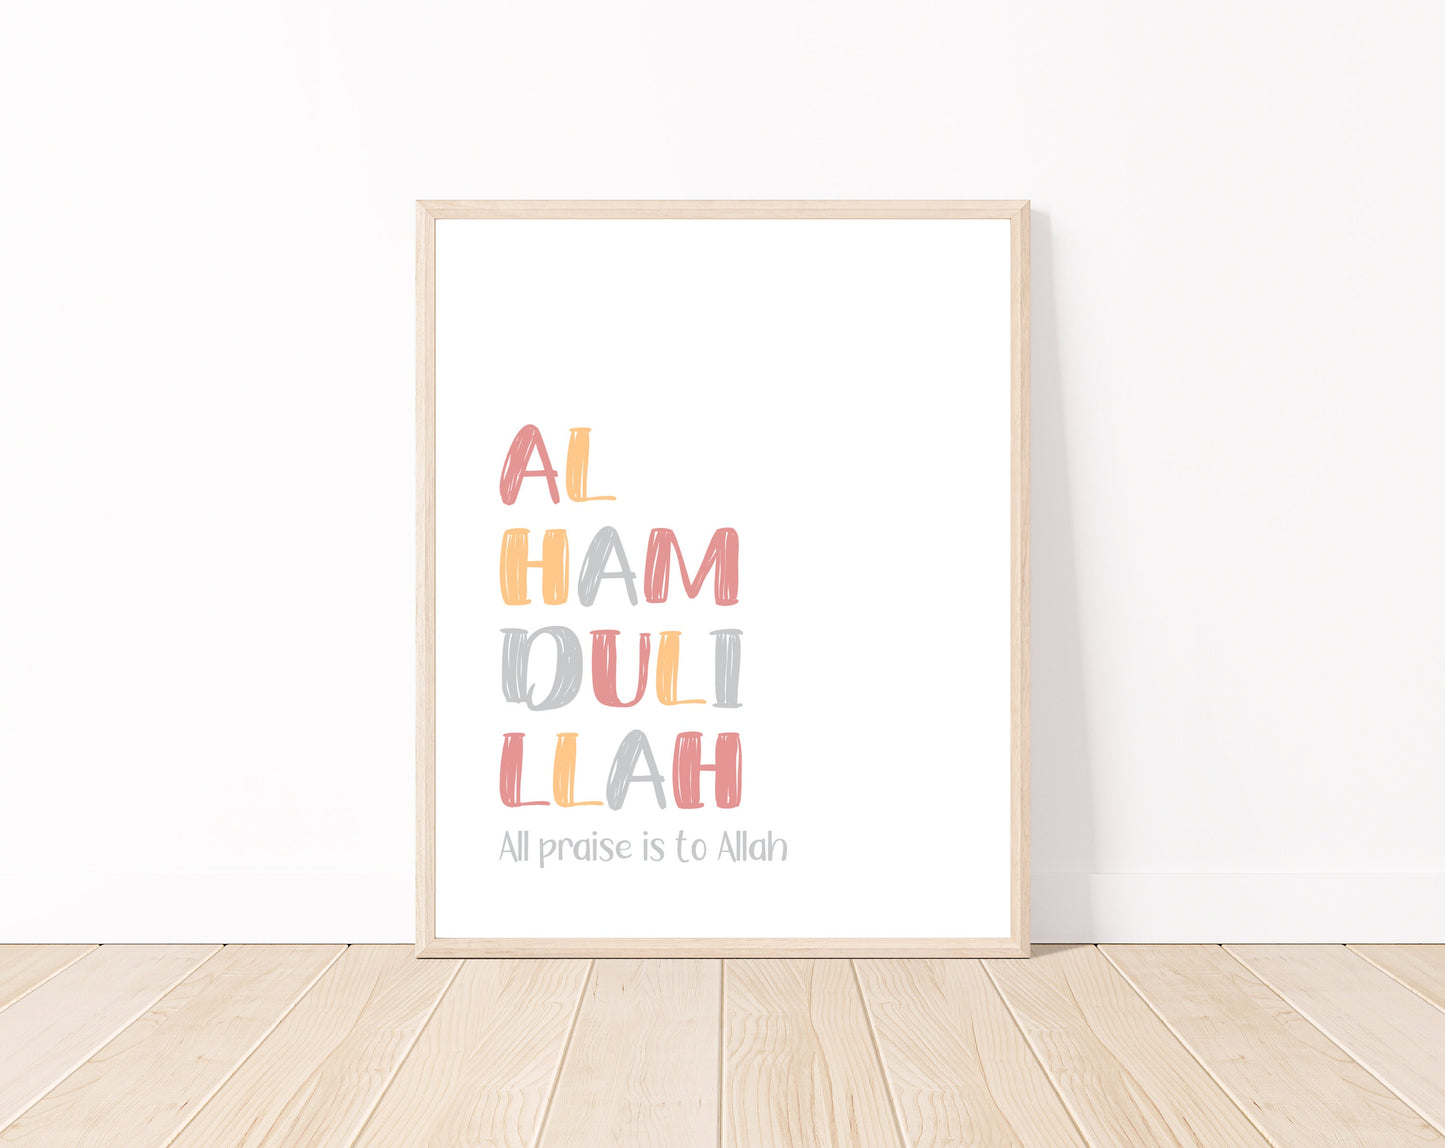 A digital print is placed on a white wall and parquet flooring. It includes “Alhamdulillah, all praise to Allah” written in multi-colored letters with a white background.